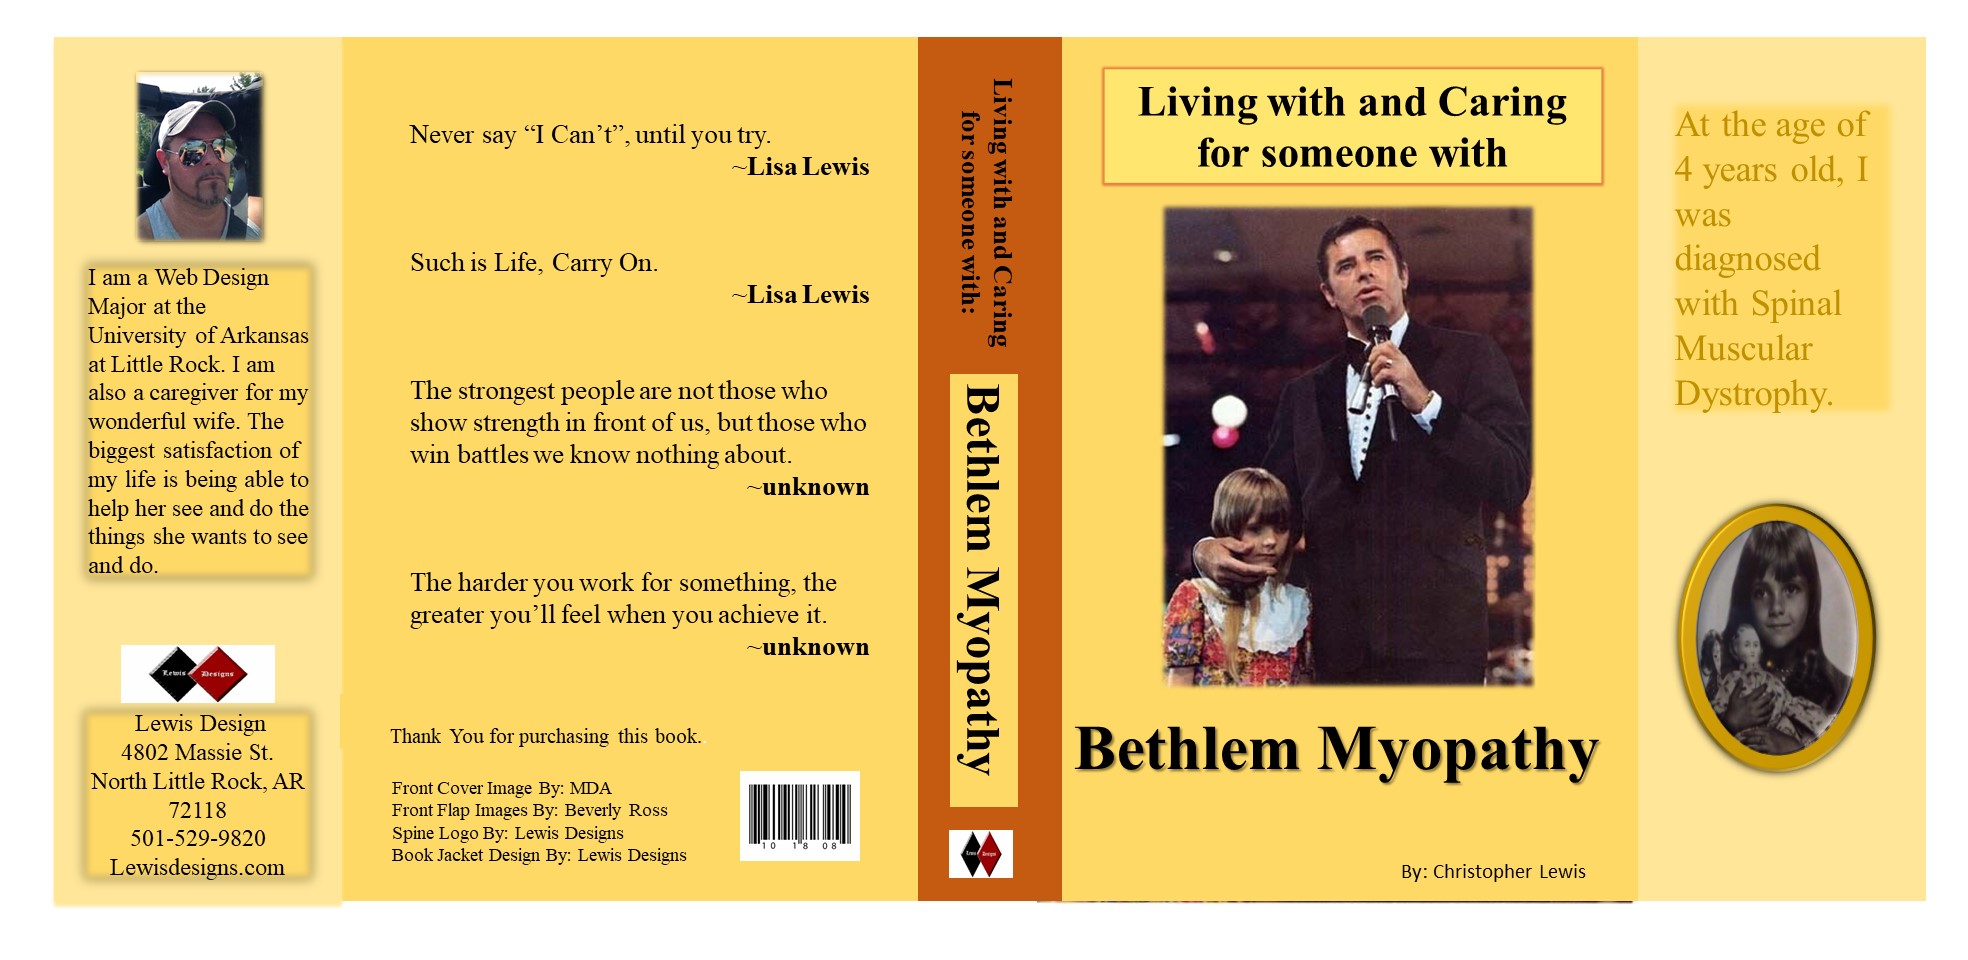 A book cover with Jerry Lewis and Lisa Lewis Cagle as a child. Lisa has muscular dystrophy. The book is                         titled Living with and Caring for someone with Bethlem Myopathy. The front flap has a oval image of Lisa as a child with a scripture saying The                        age she was diagnosed with Bethlem Myopathy. The back cover has different sayings from famous people. The back flap talks about the author and                         designer of the book.